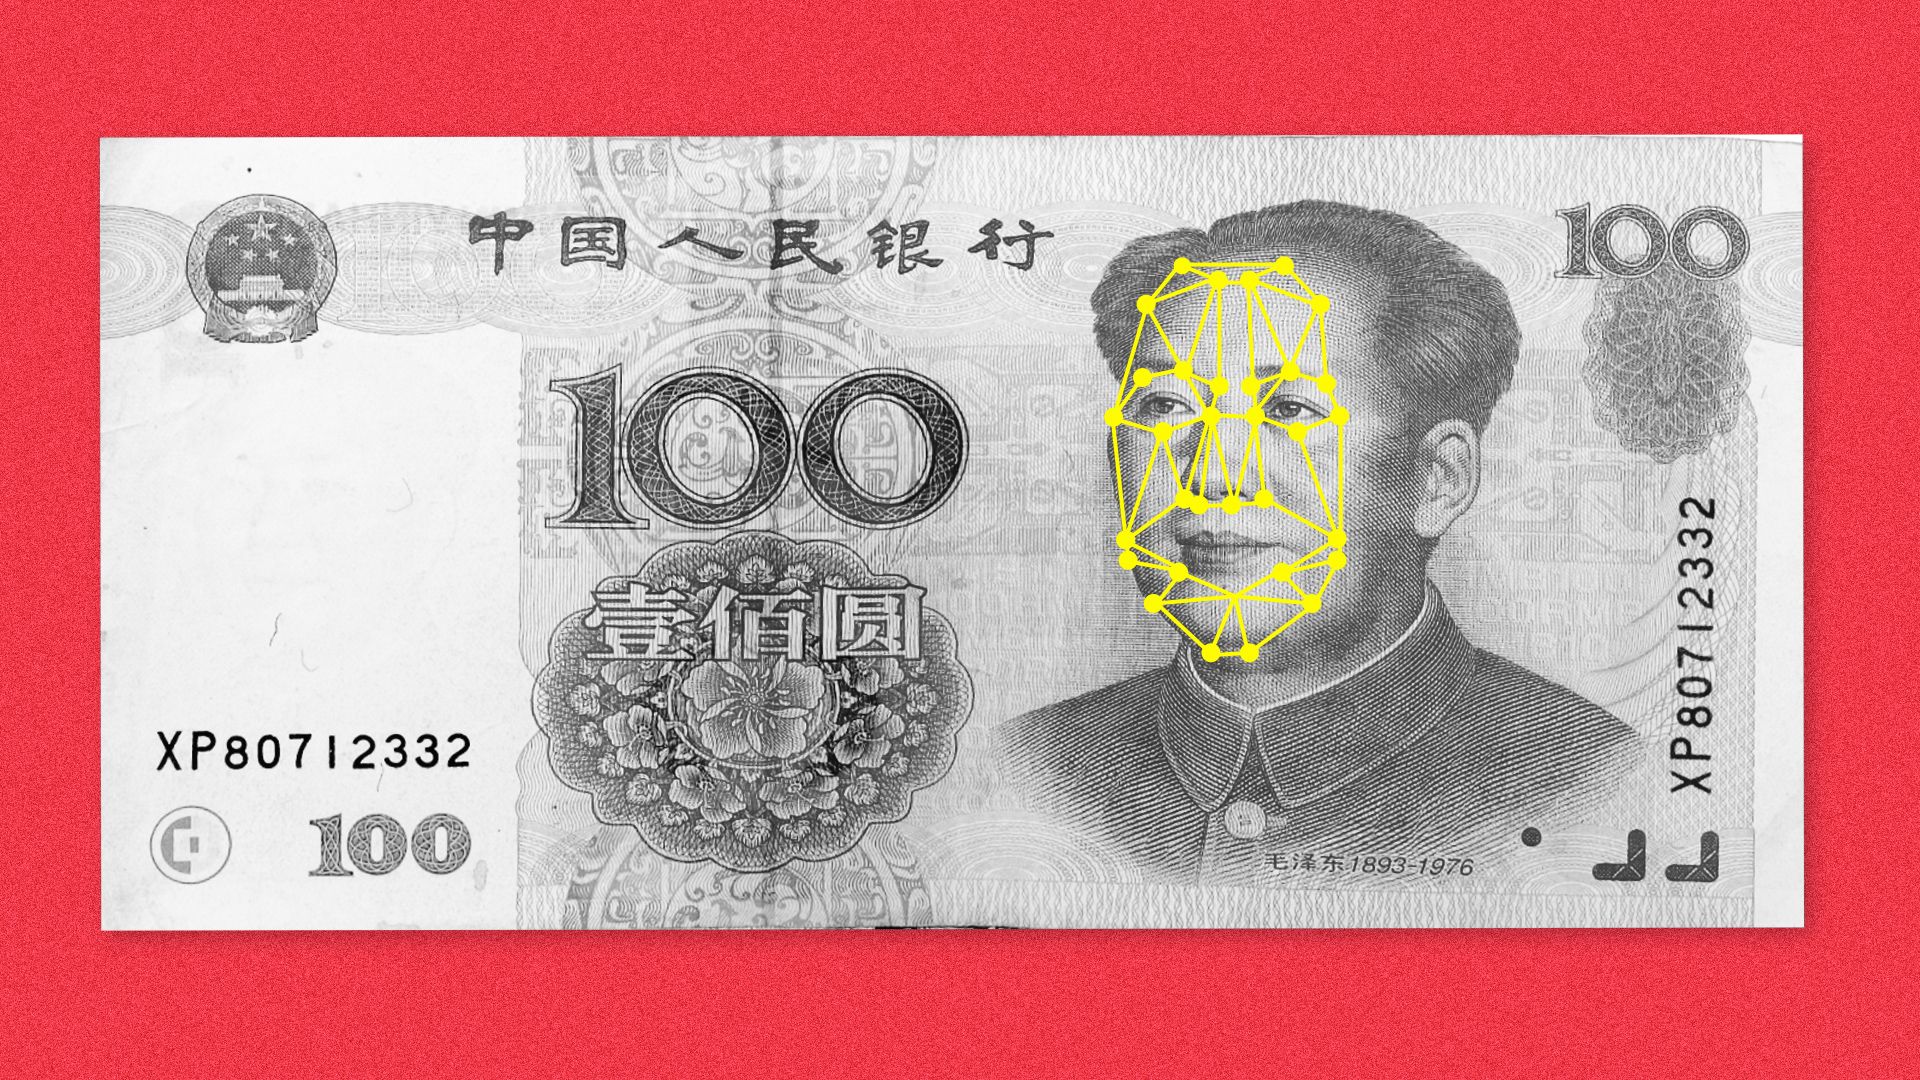 Illustration of a Yuan/Renminbi with facial recognition points on Mao Zedong's face. 